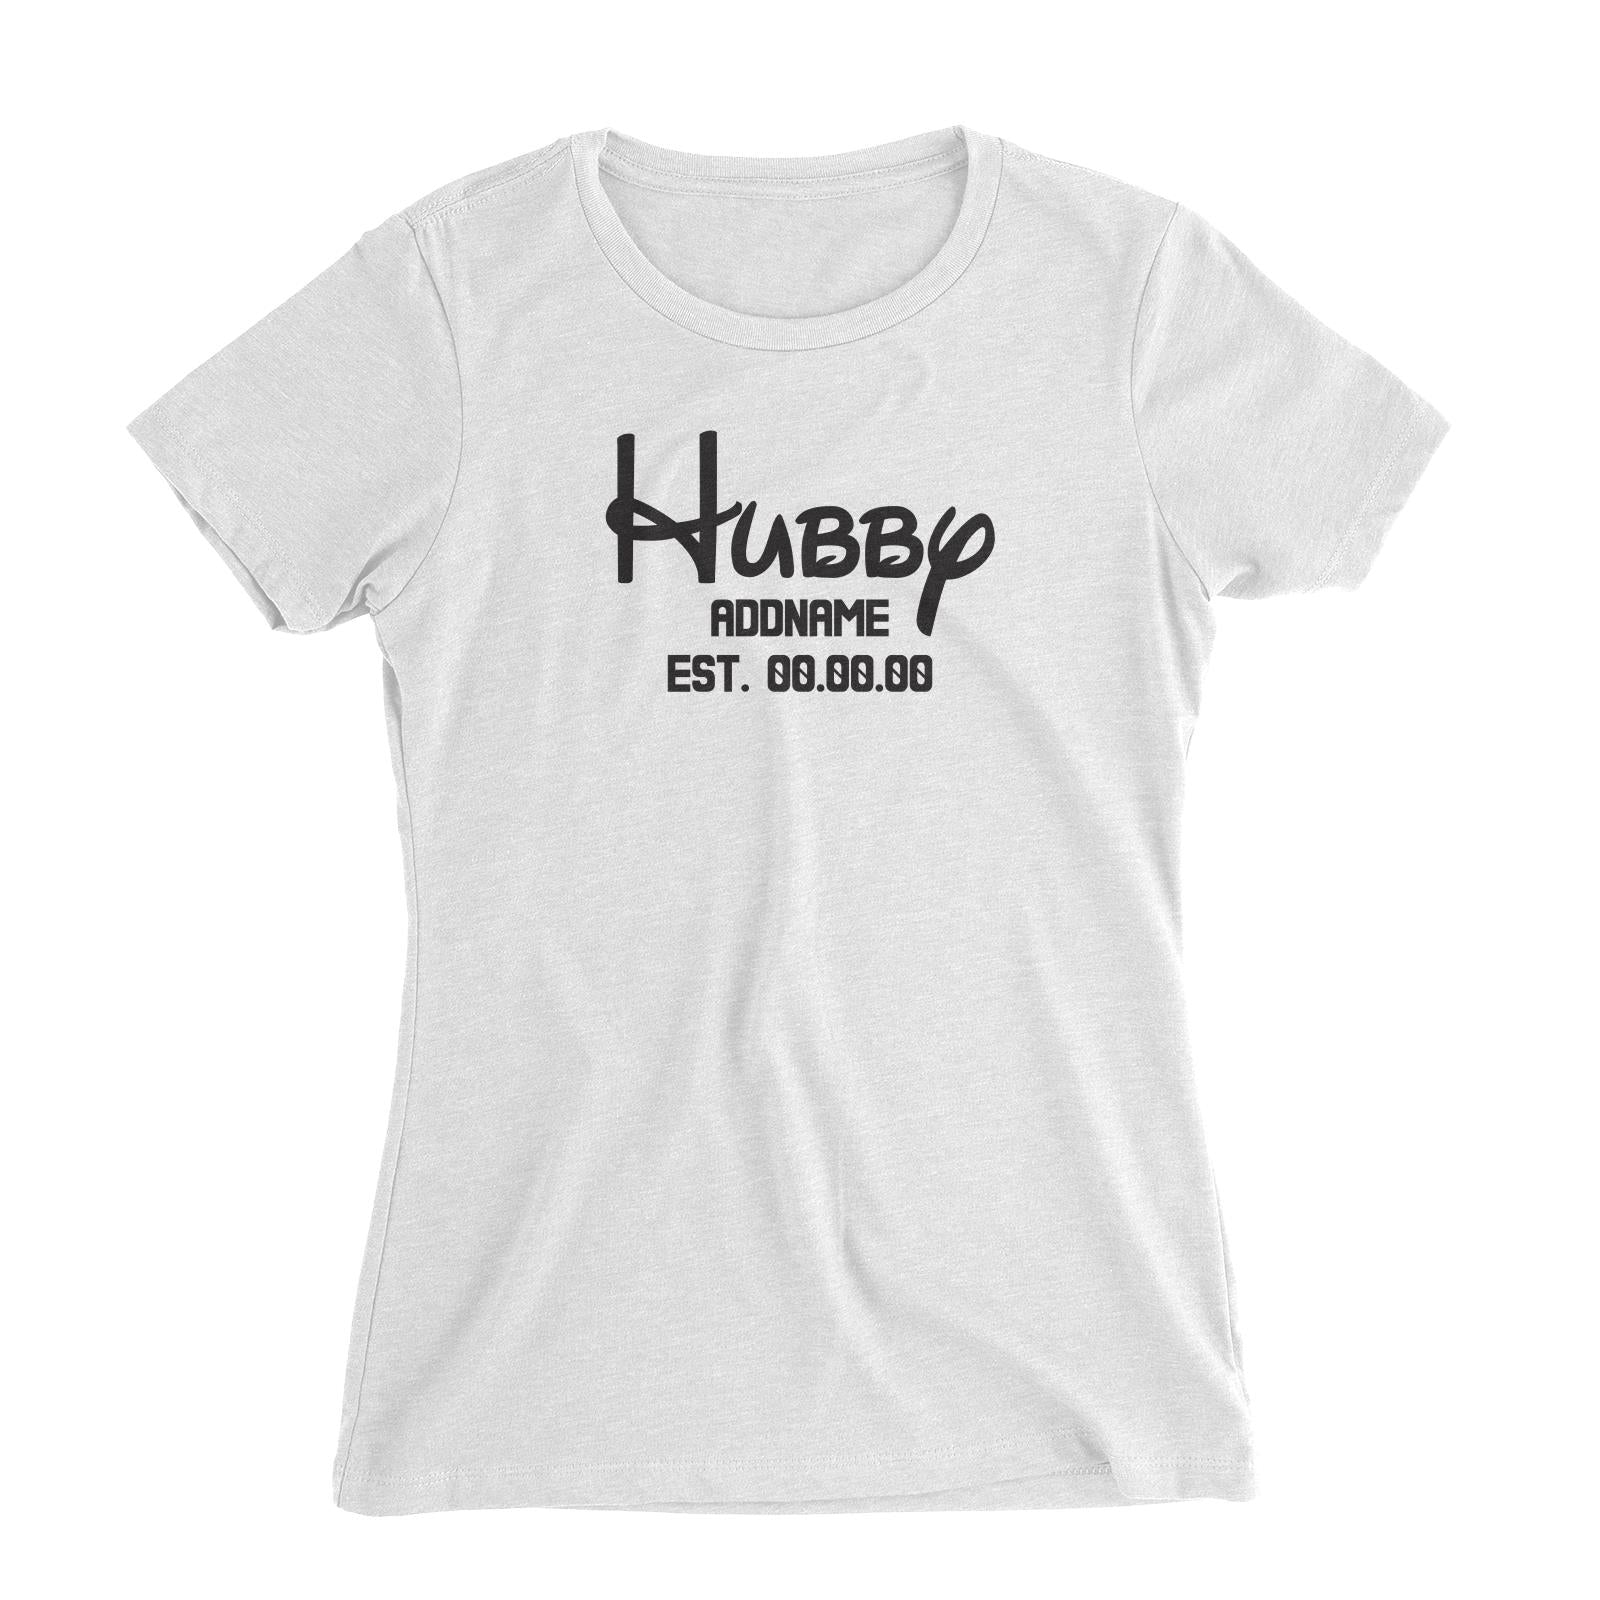 Husband and Wife Hubby Addname With Date Women Slim Fit T-Shirt